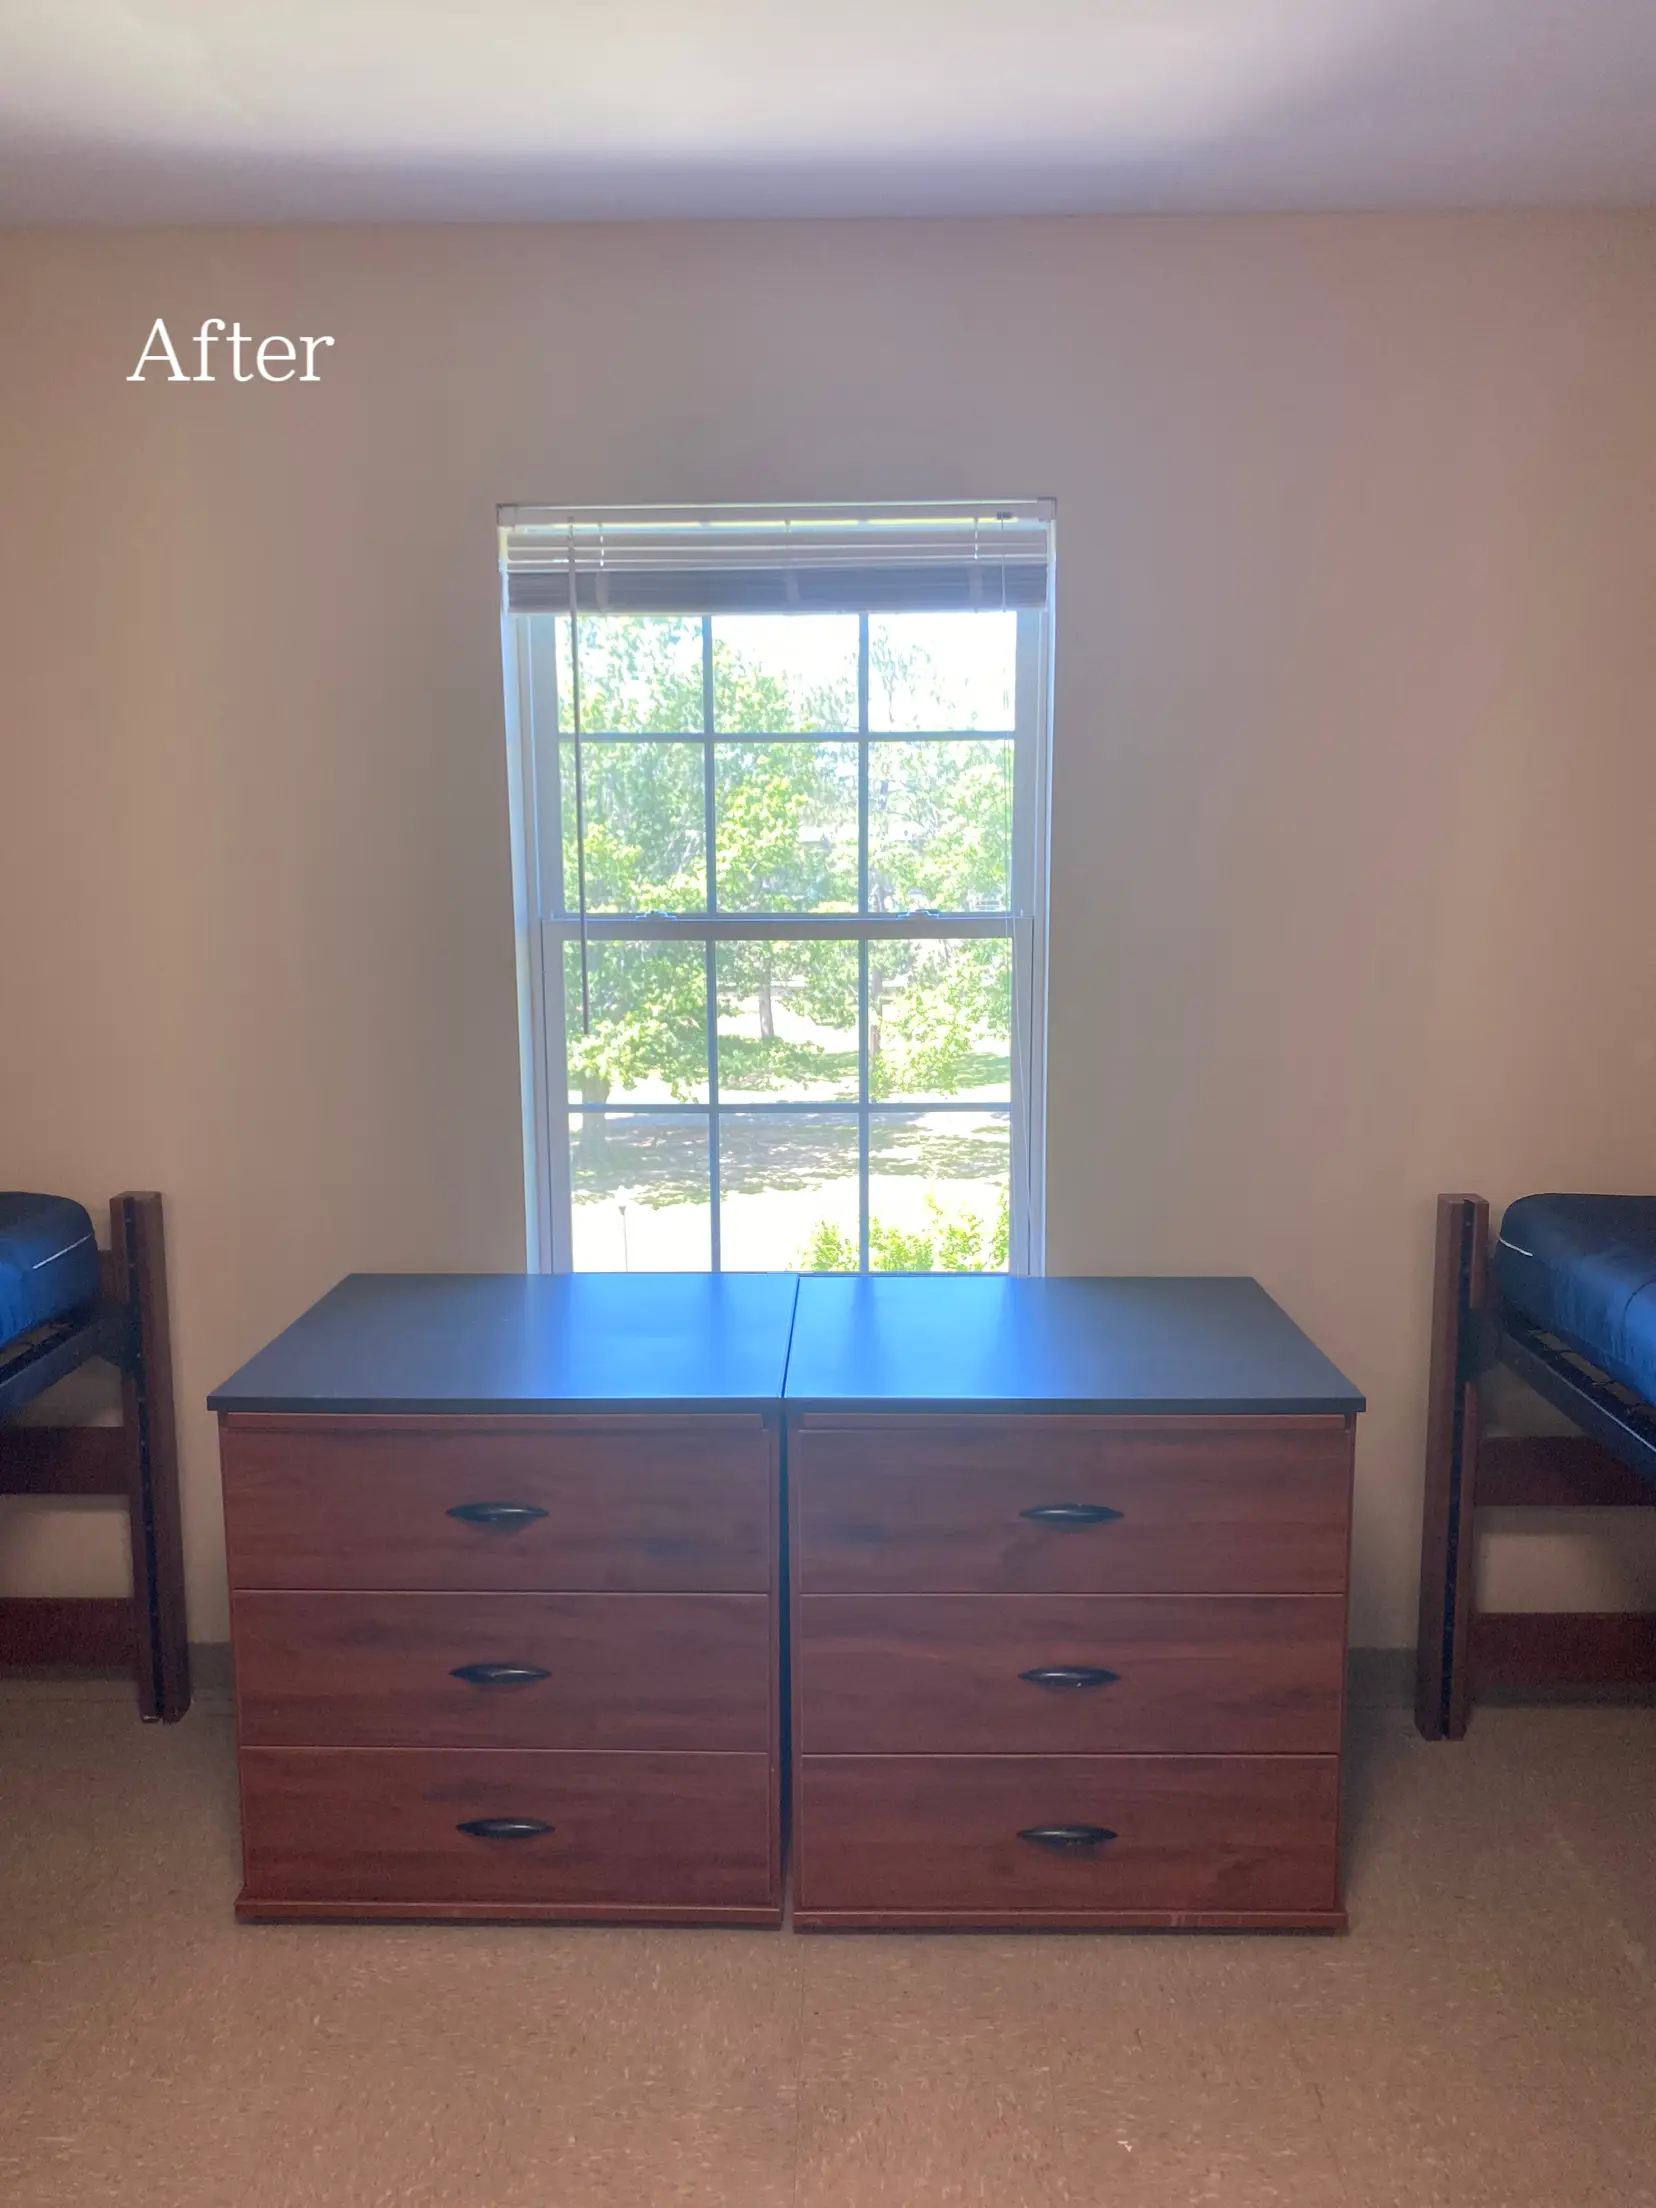  A bedroom with a bed and a desk. The desk has a drawer and a chair. The room is painted blue and has a window.